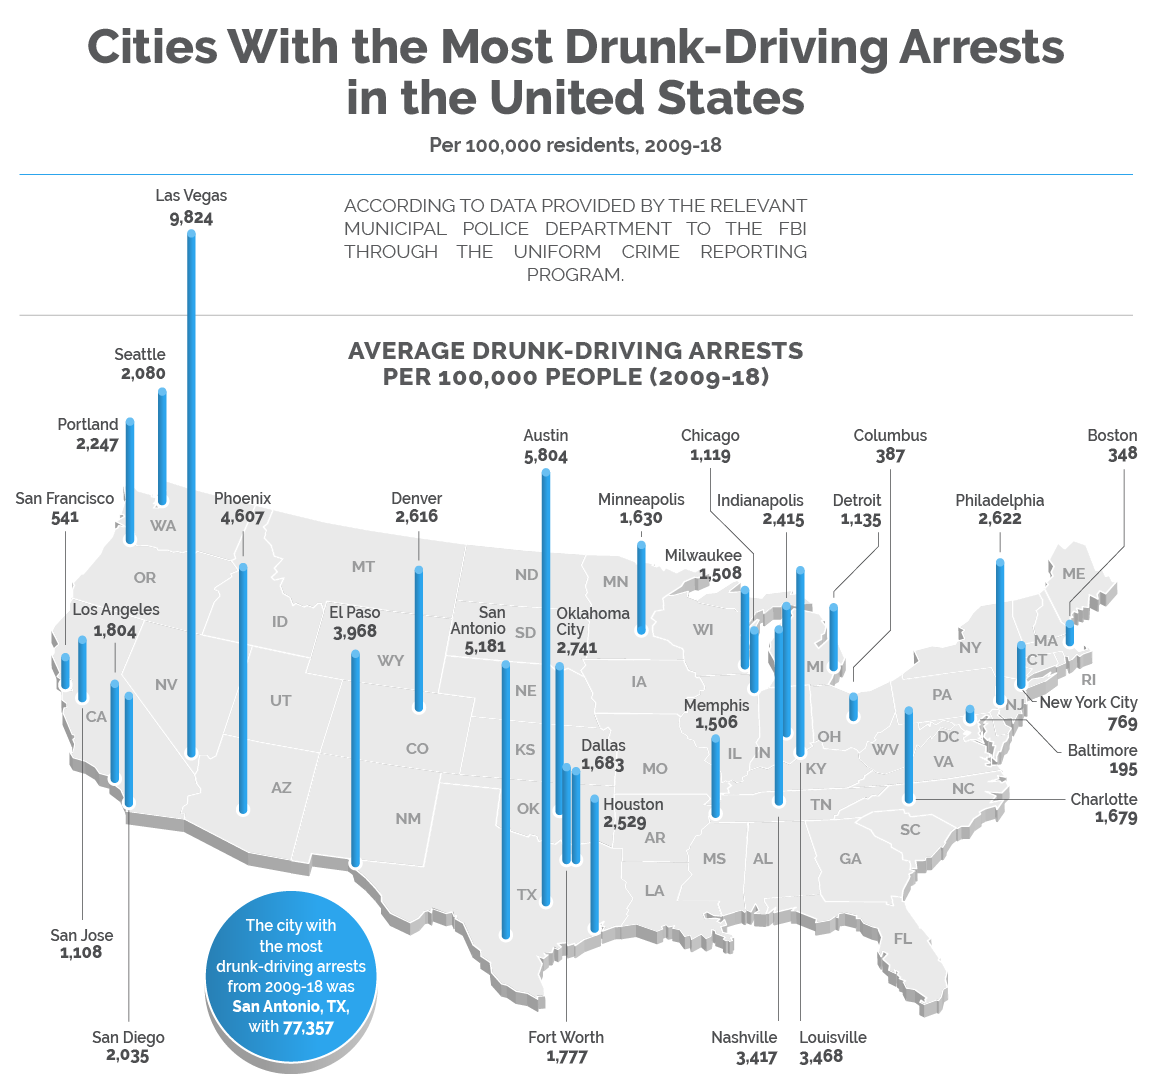 Cities With the Most Drunk-Driving Arrests in the United States